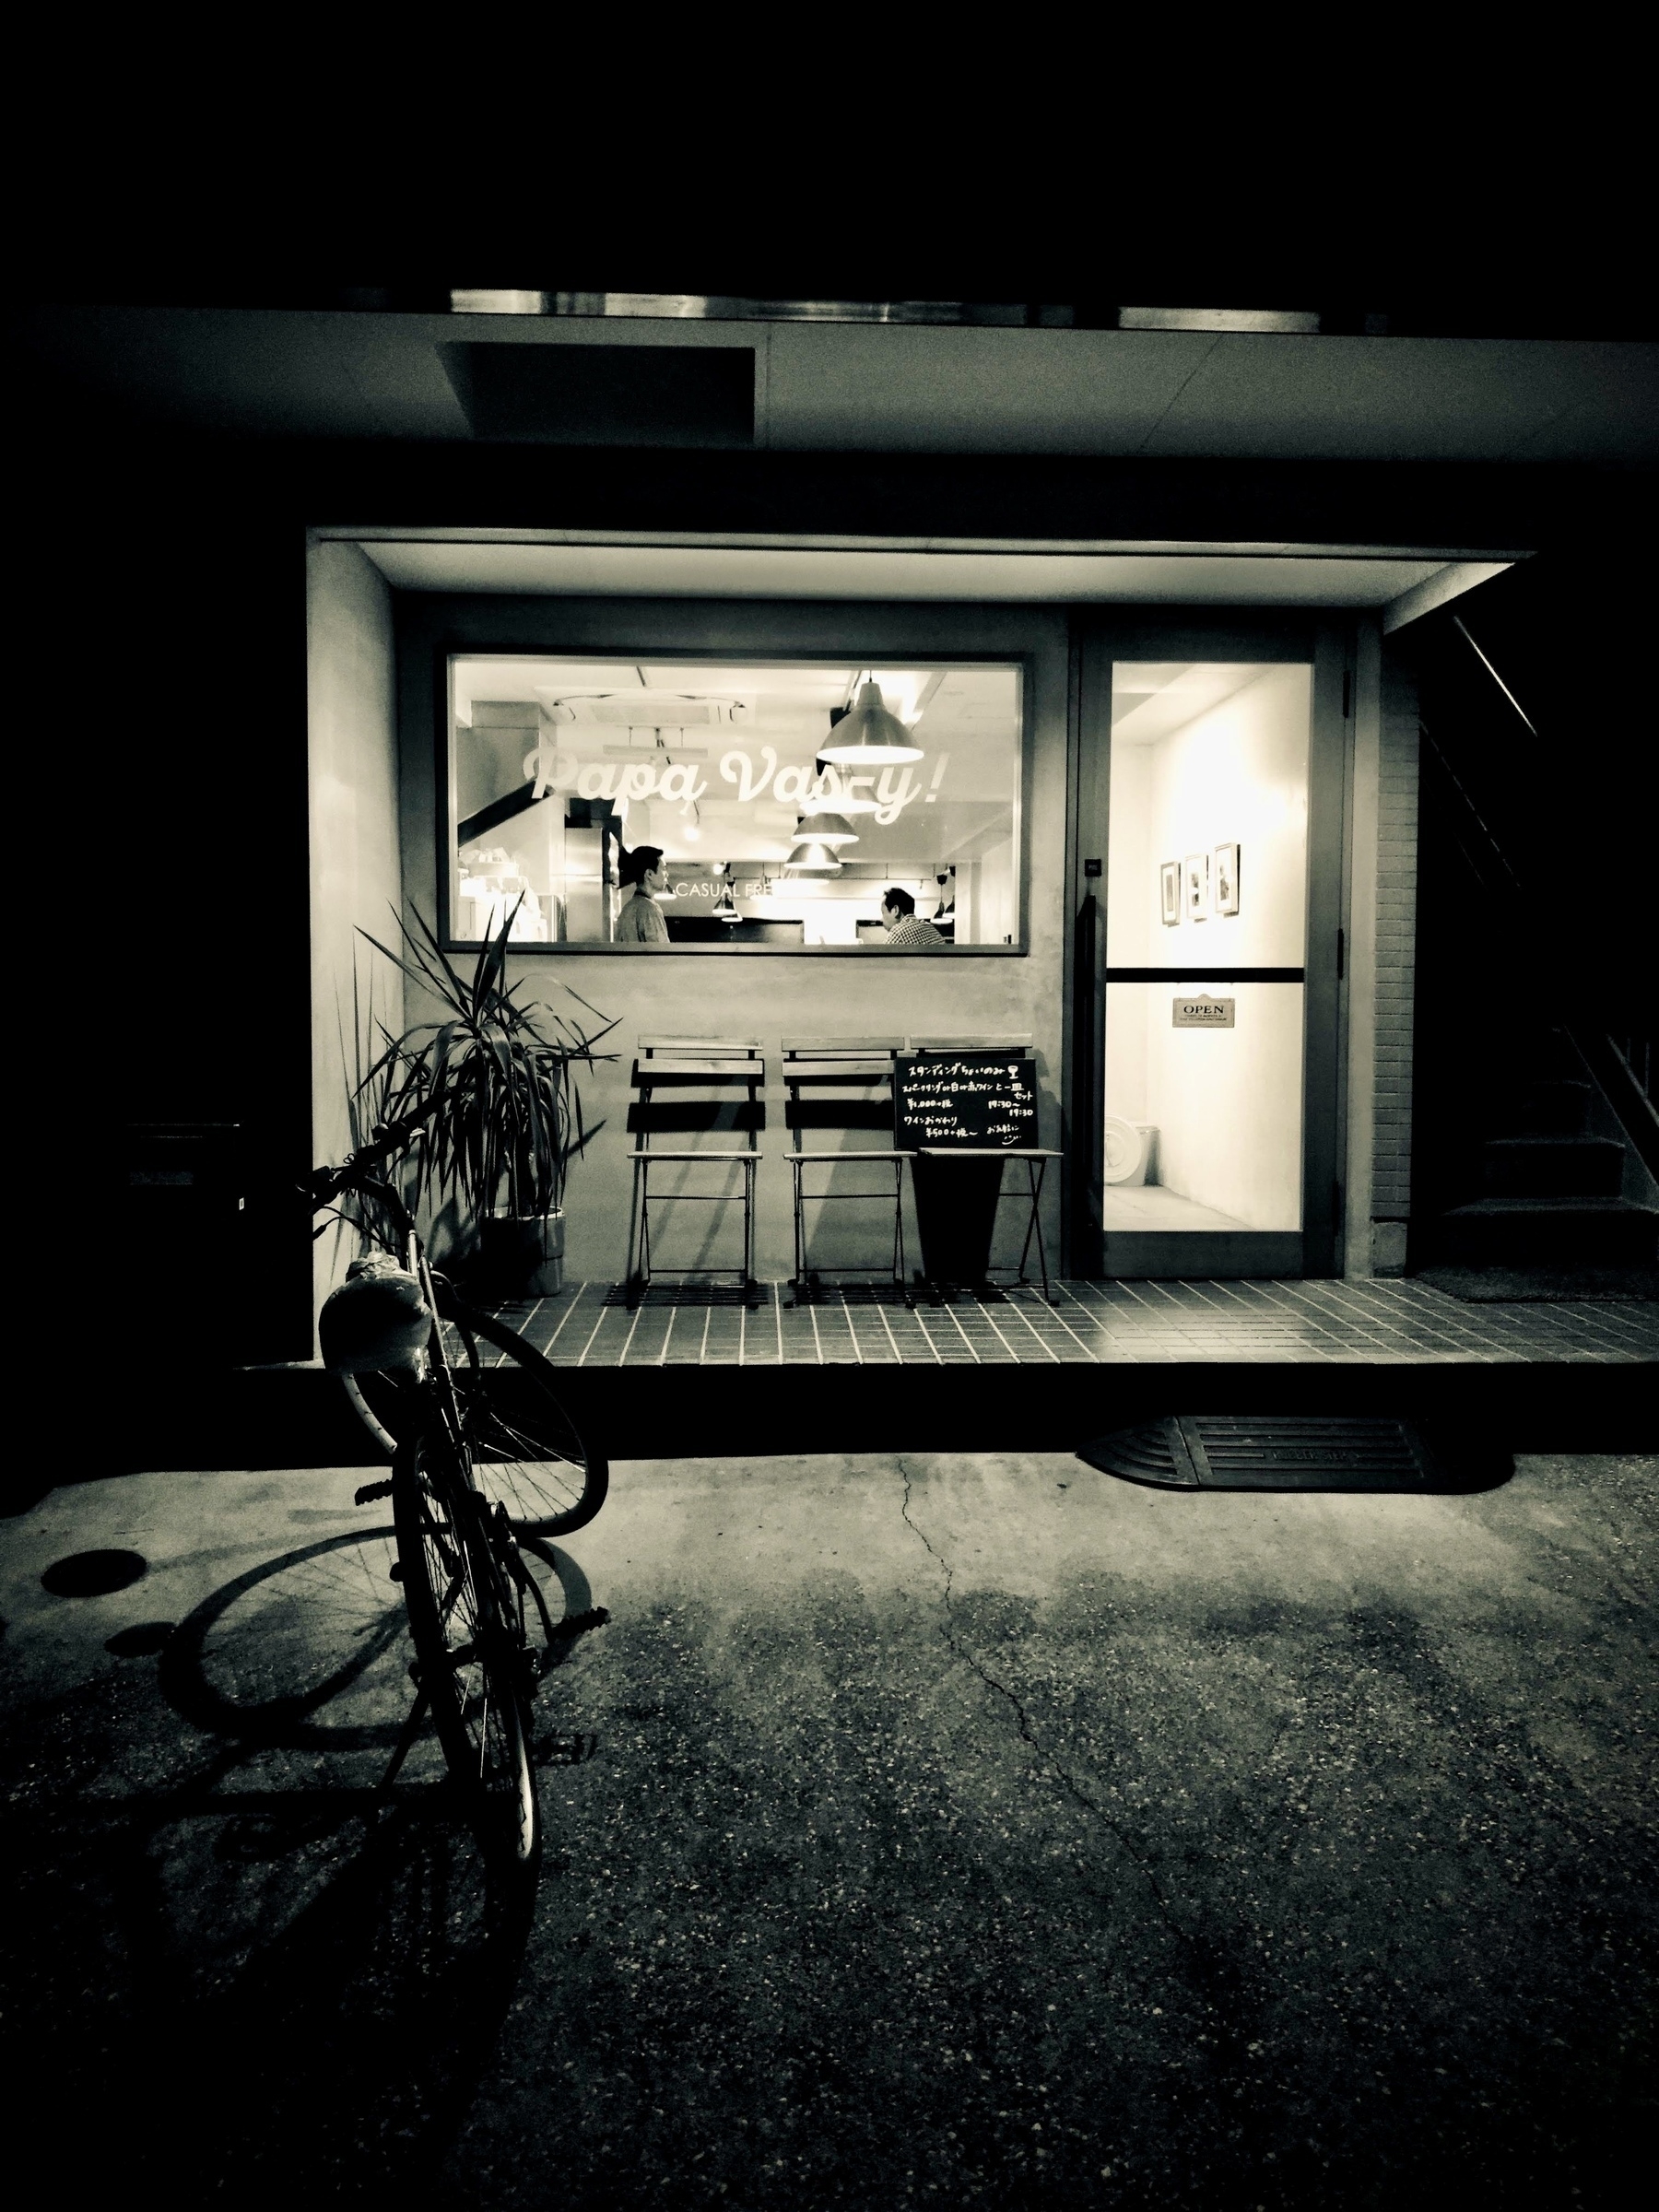 Night view of the store front of the “Papa Vasy” casual French restaurant in Totsuka, with bicycle parked in front. 